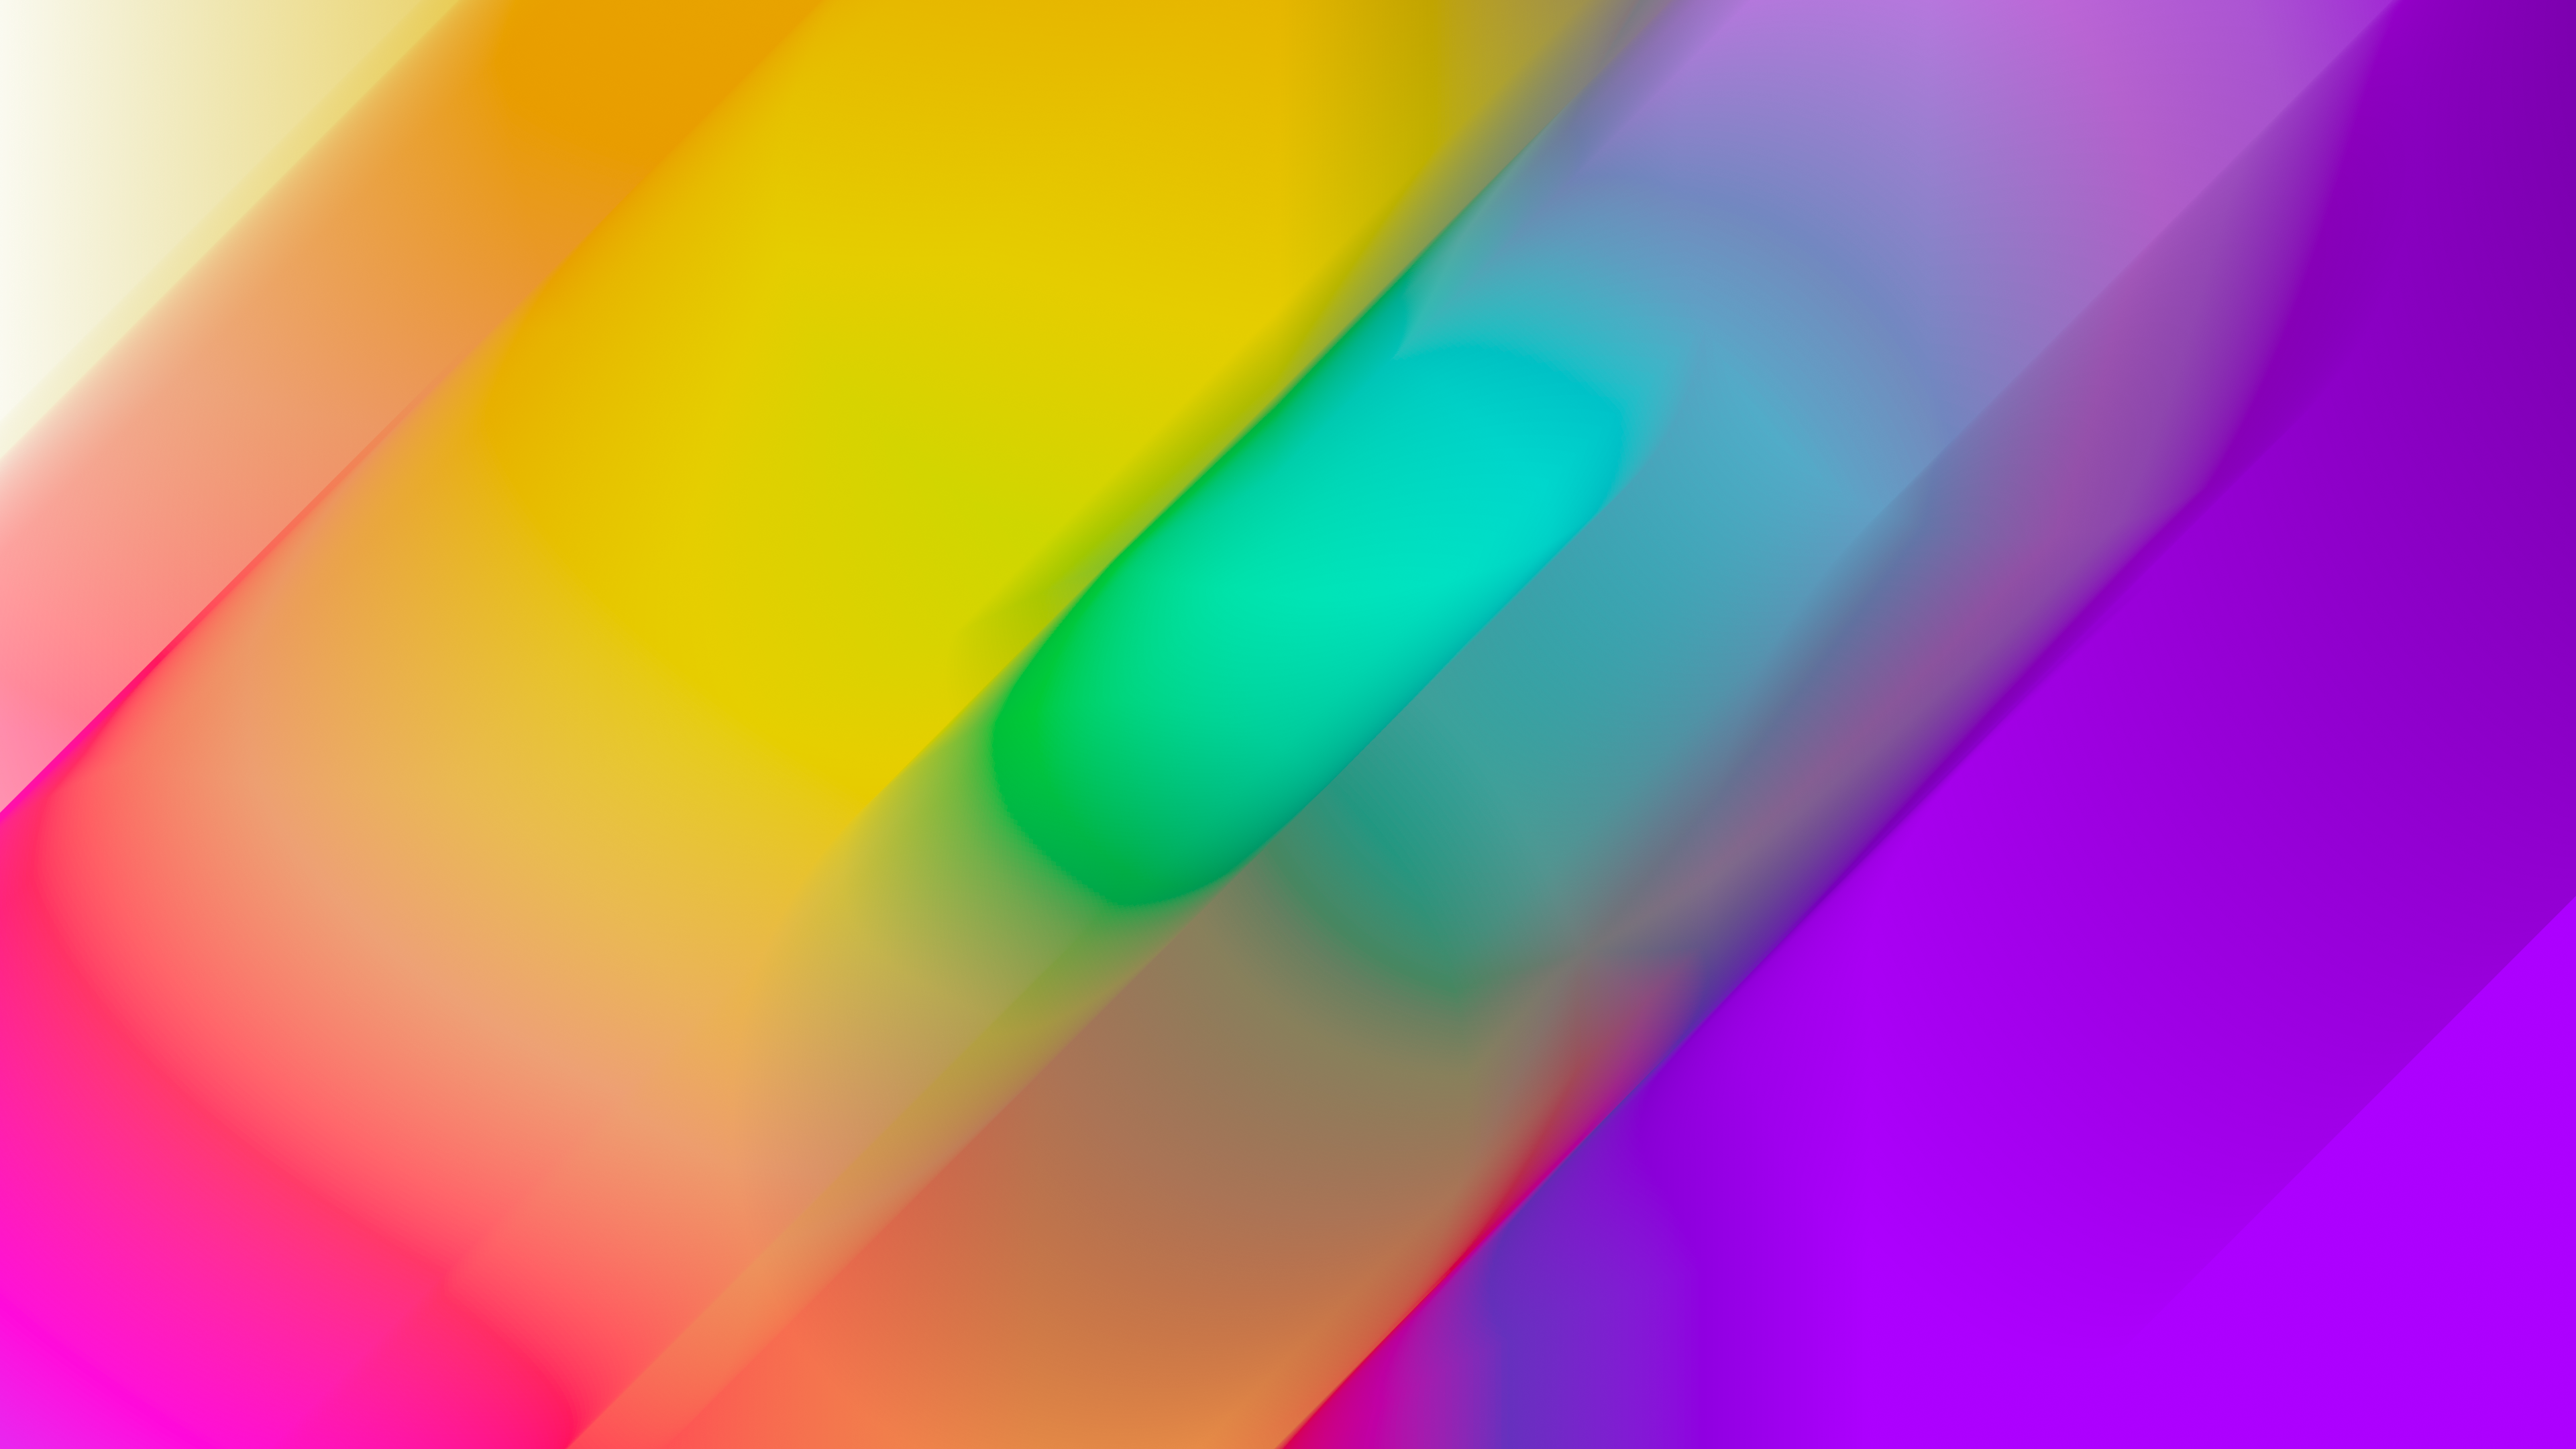 General 3840x2160 abstract colorful yellow purple pink turquoise digital art